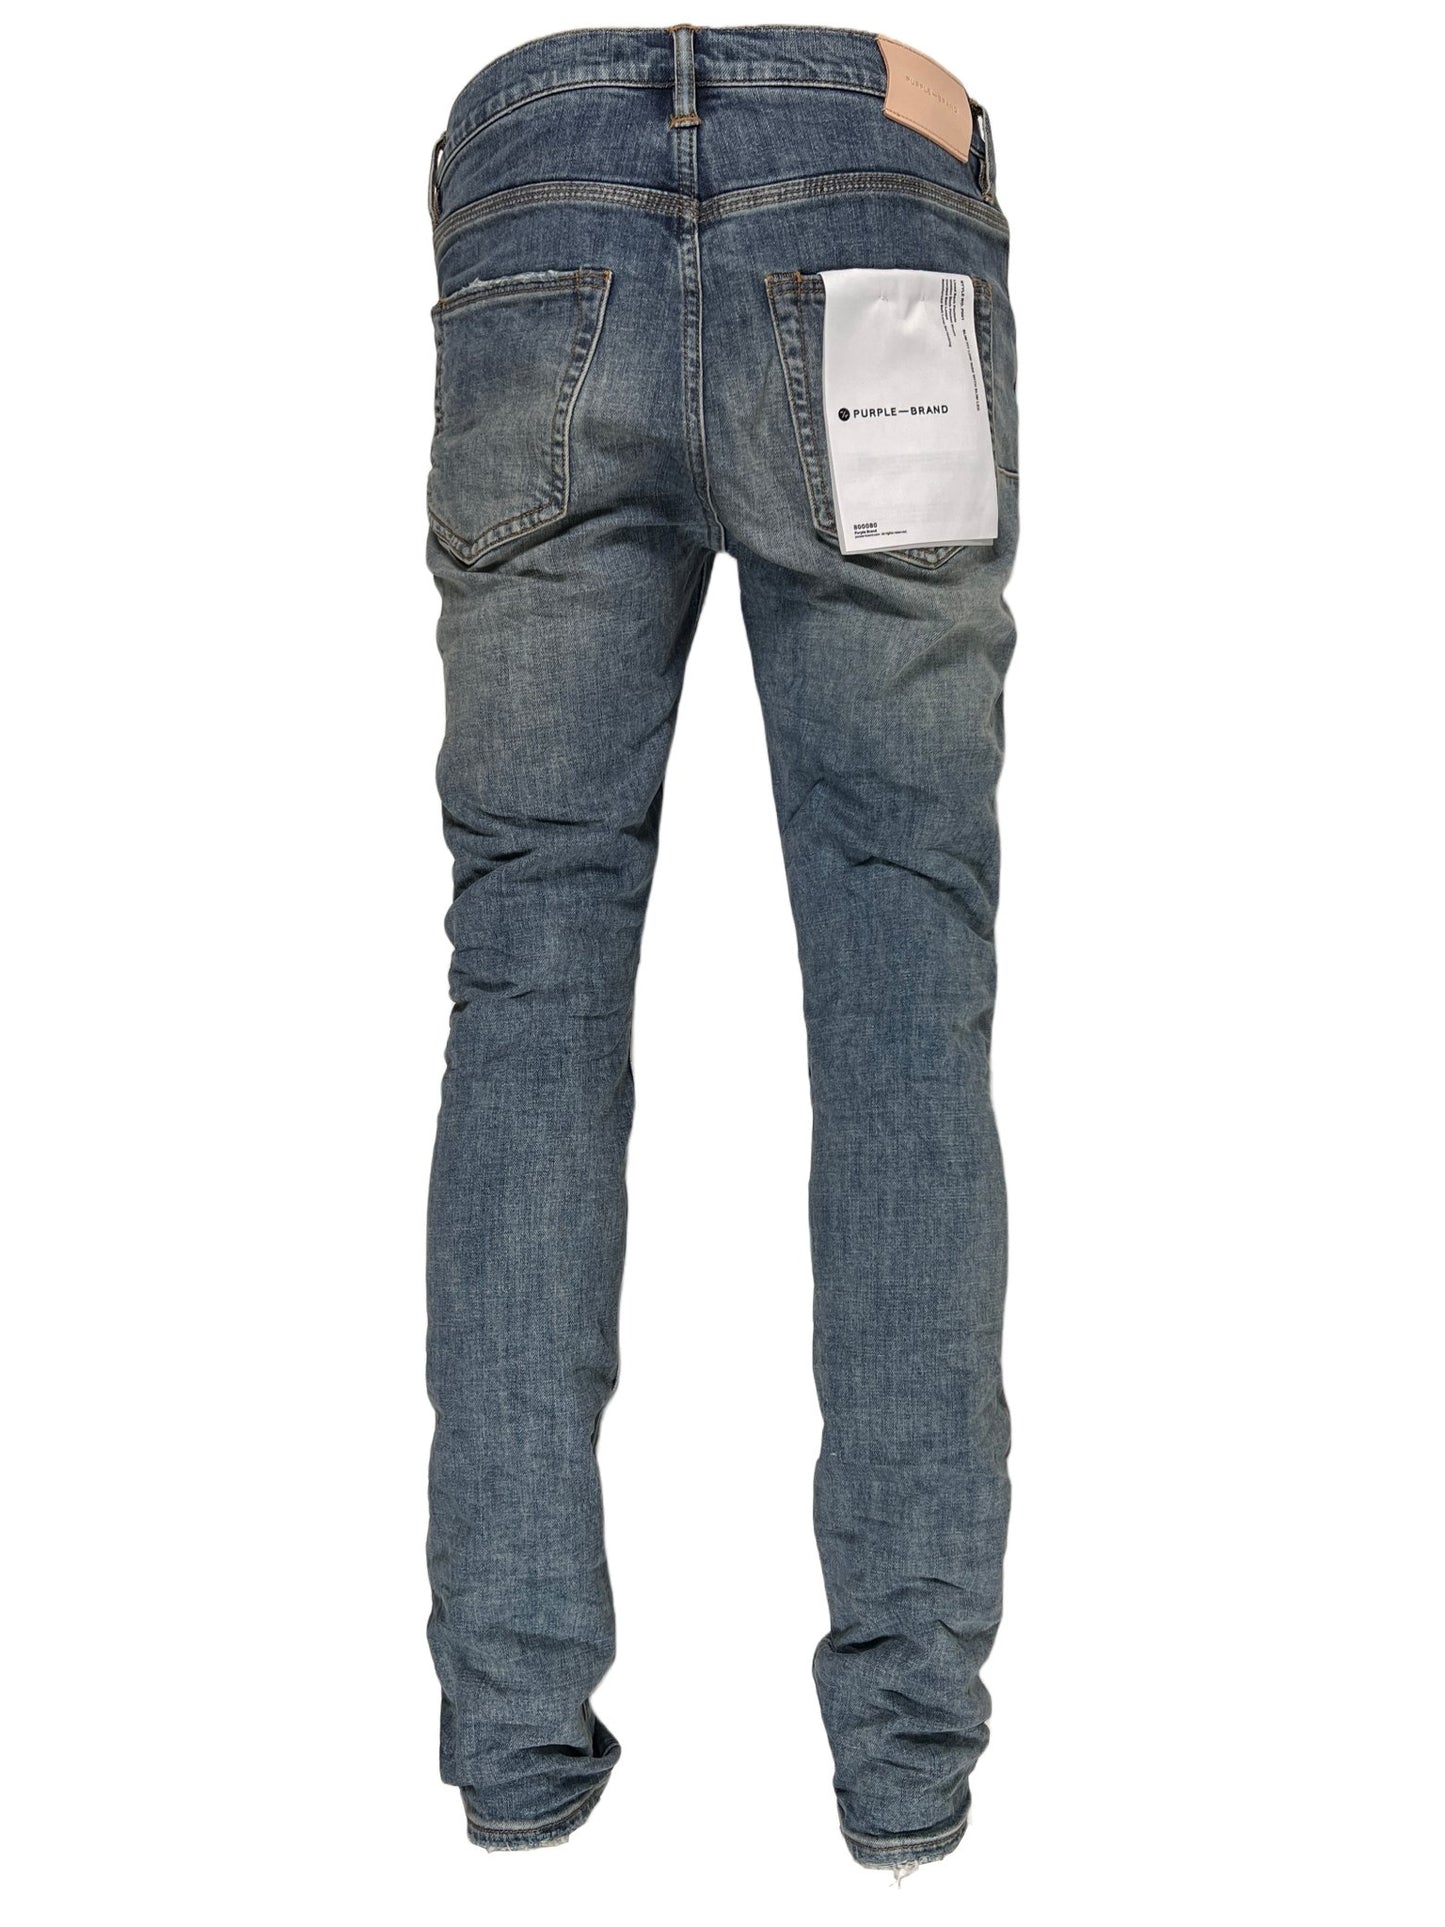 A pair of PURPLE BRAND JEANS P001-WLIB WORN LIGHT INDIGO BLOWOUT with a white tag on the back from PURPLE BRAND.